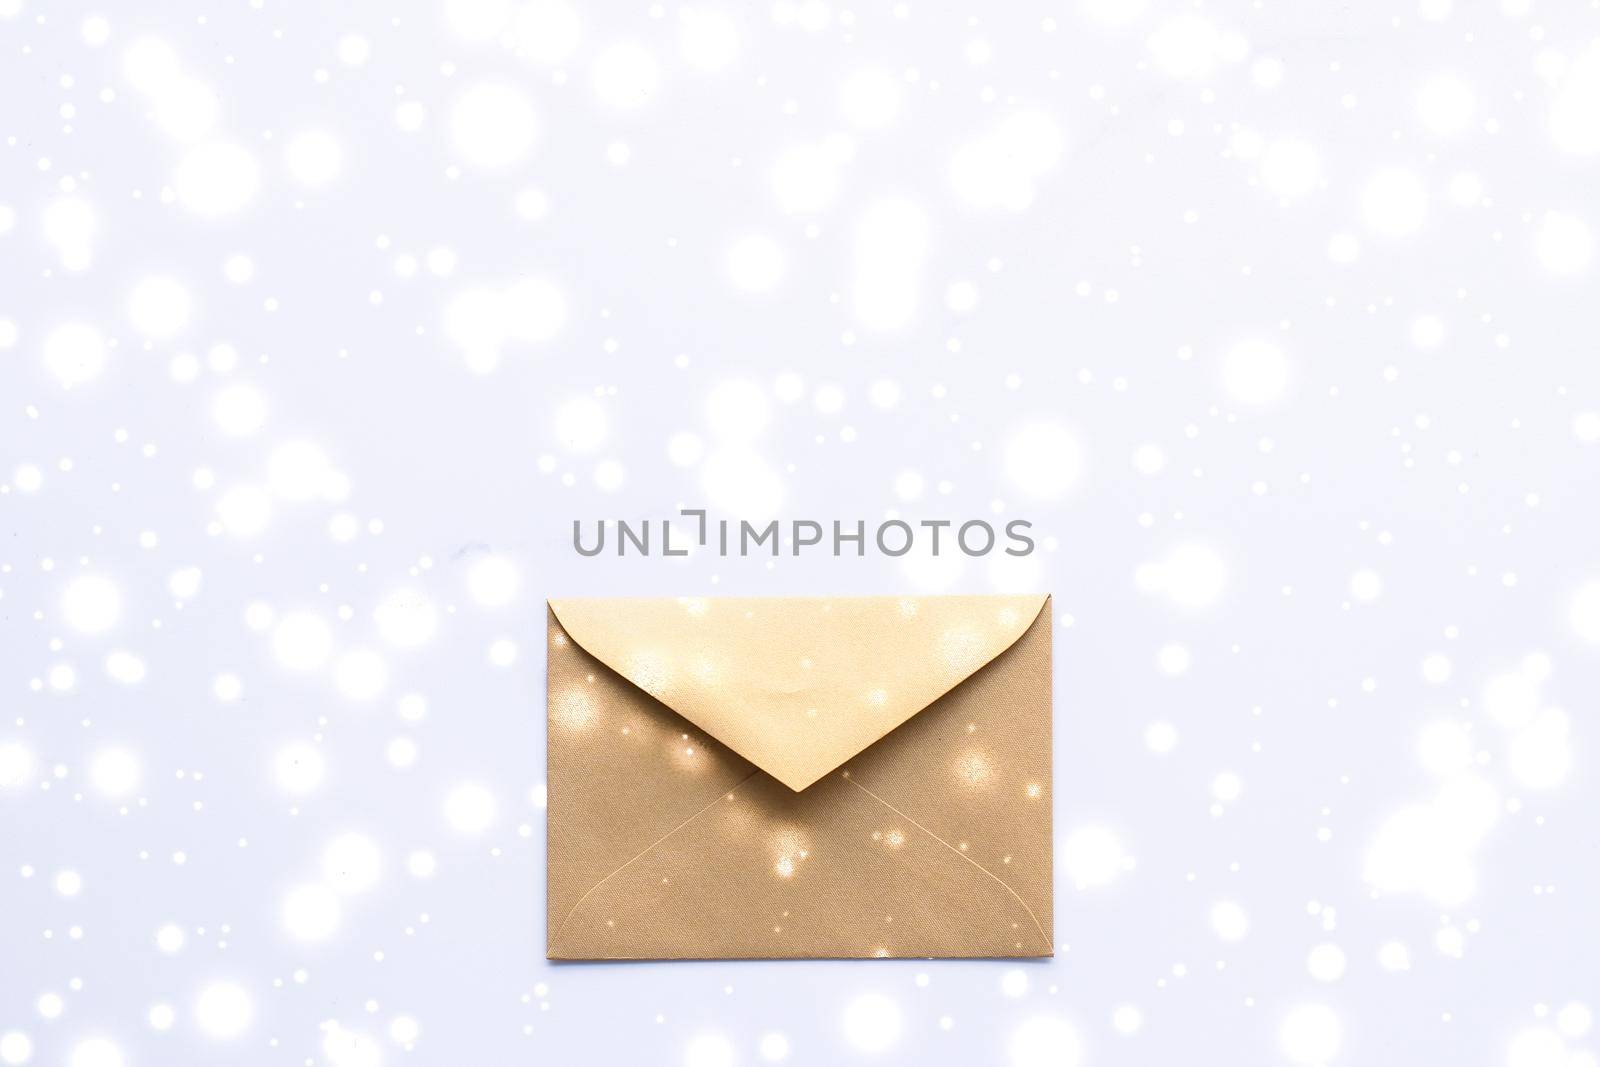 Winter holiday blank paper envelopes on marble with shiny snow flatlay background, love letter or Christmas mail card design by Anneleven